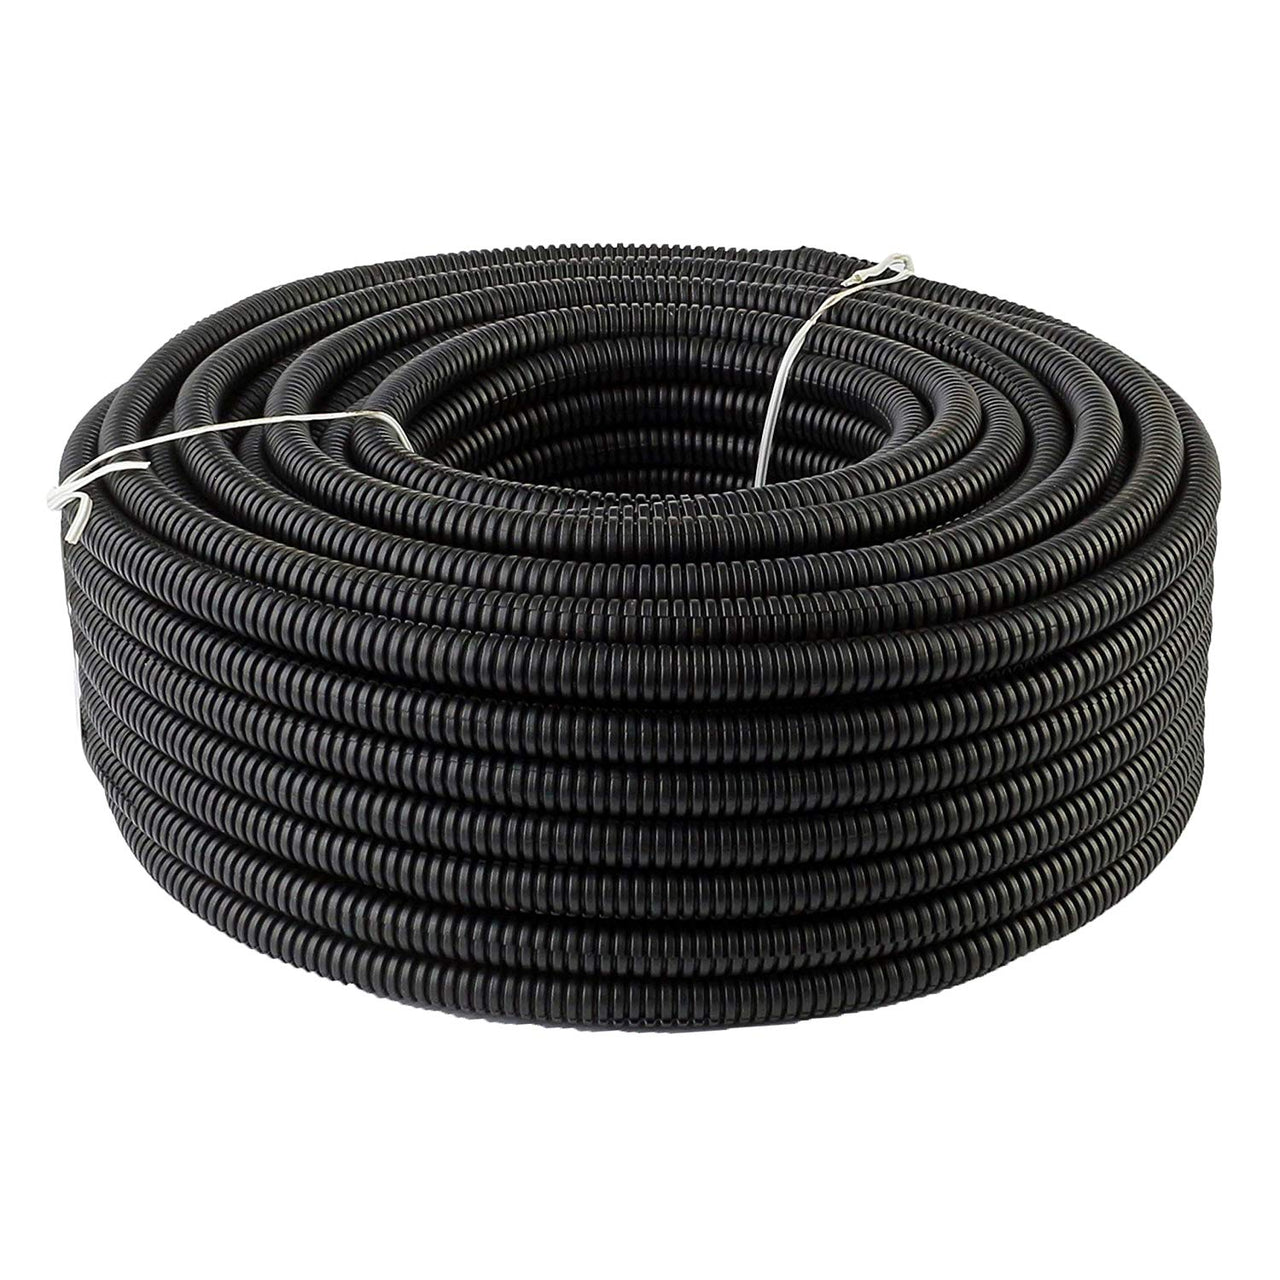 Absolute SLT14 25' + 3M Electrical Tape 25 feet 1/4" split loom wire tubing hose cover auto home marine + 3M Temflex 1700 electrical tape